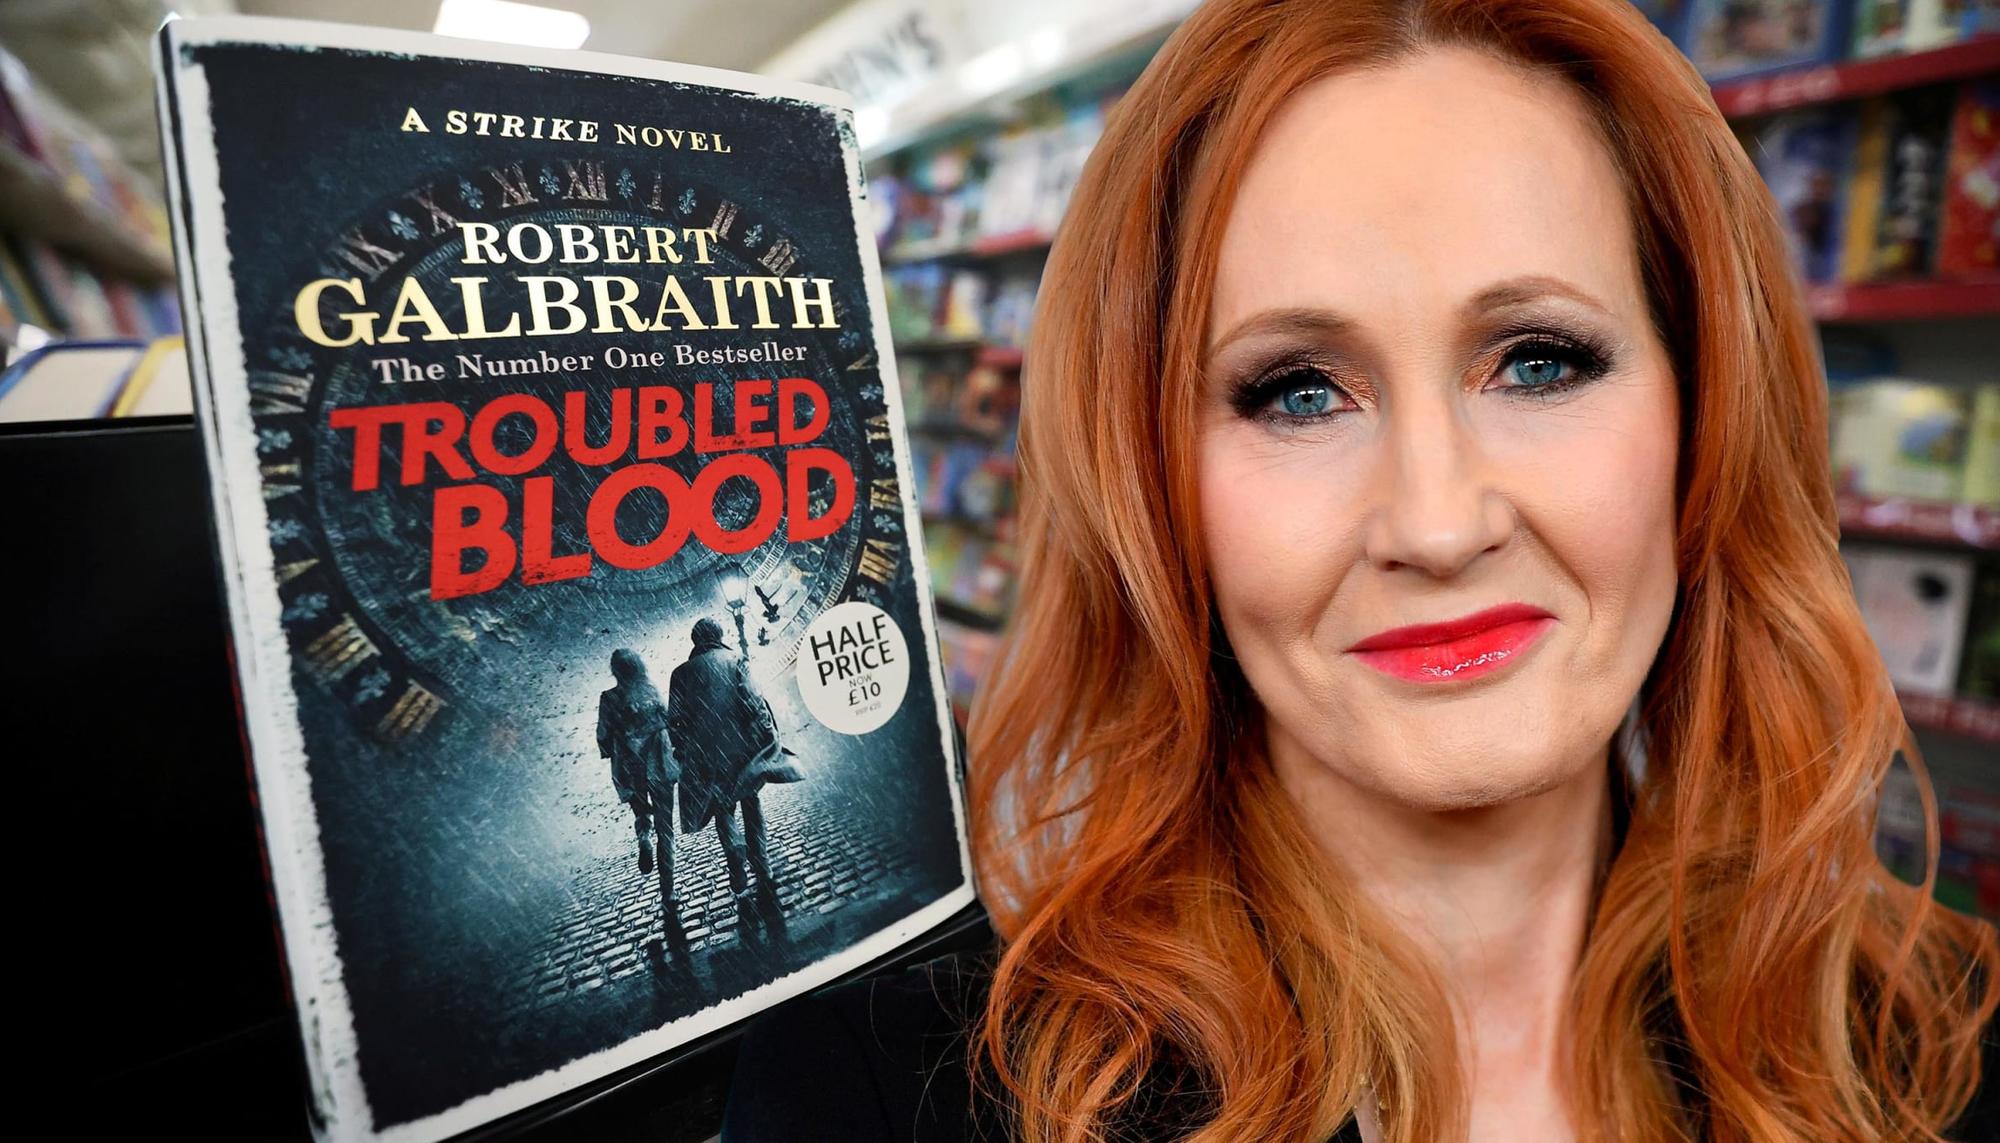 Rowling Troubled Blood